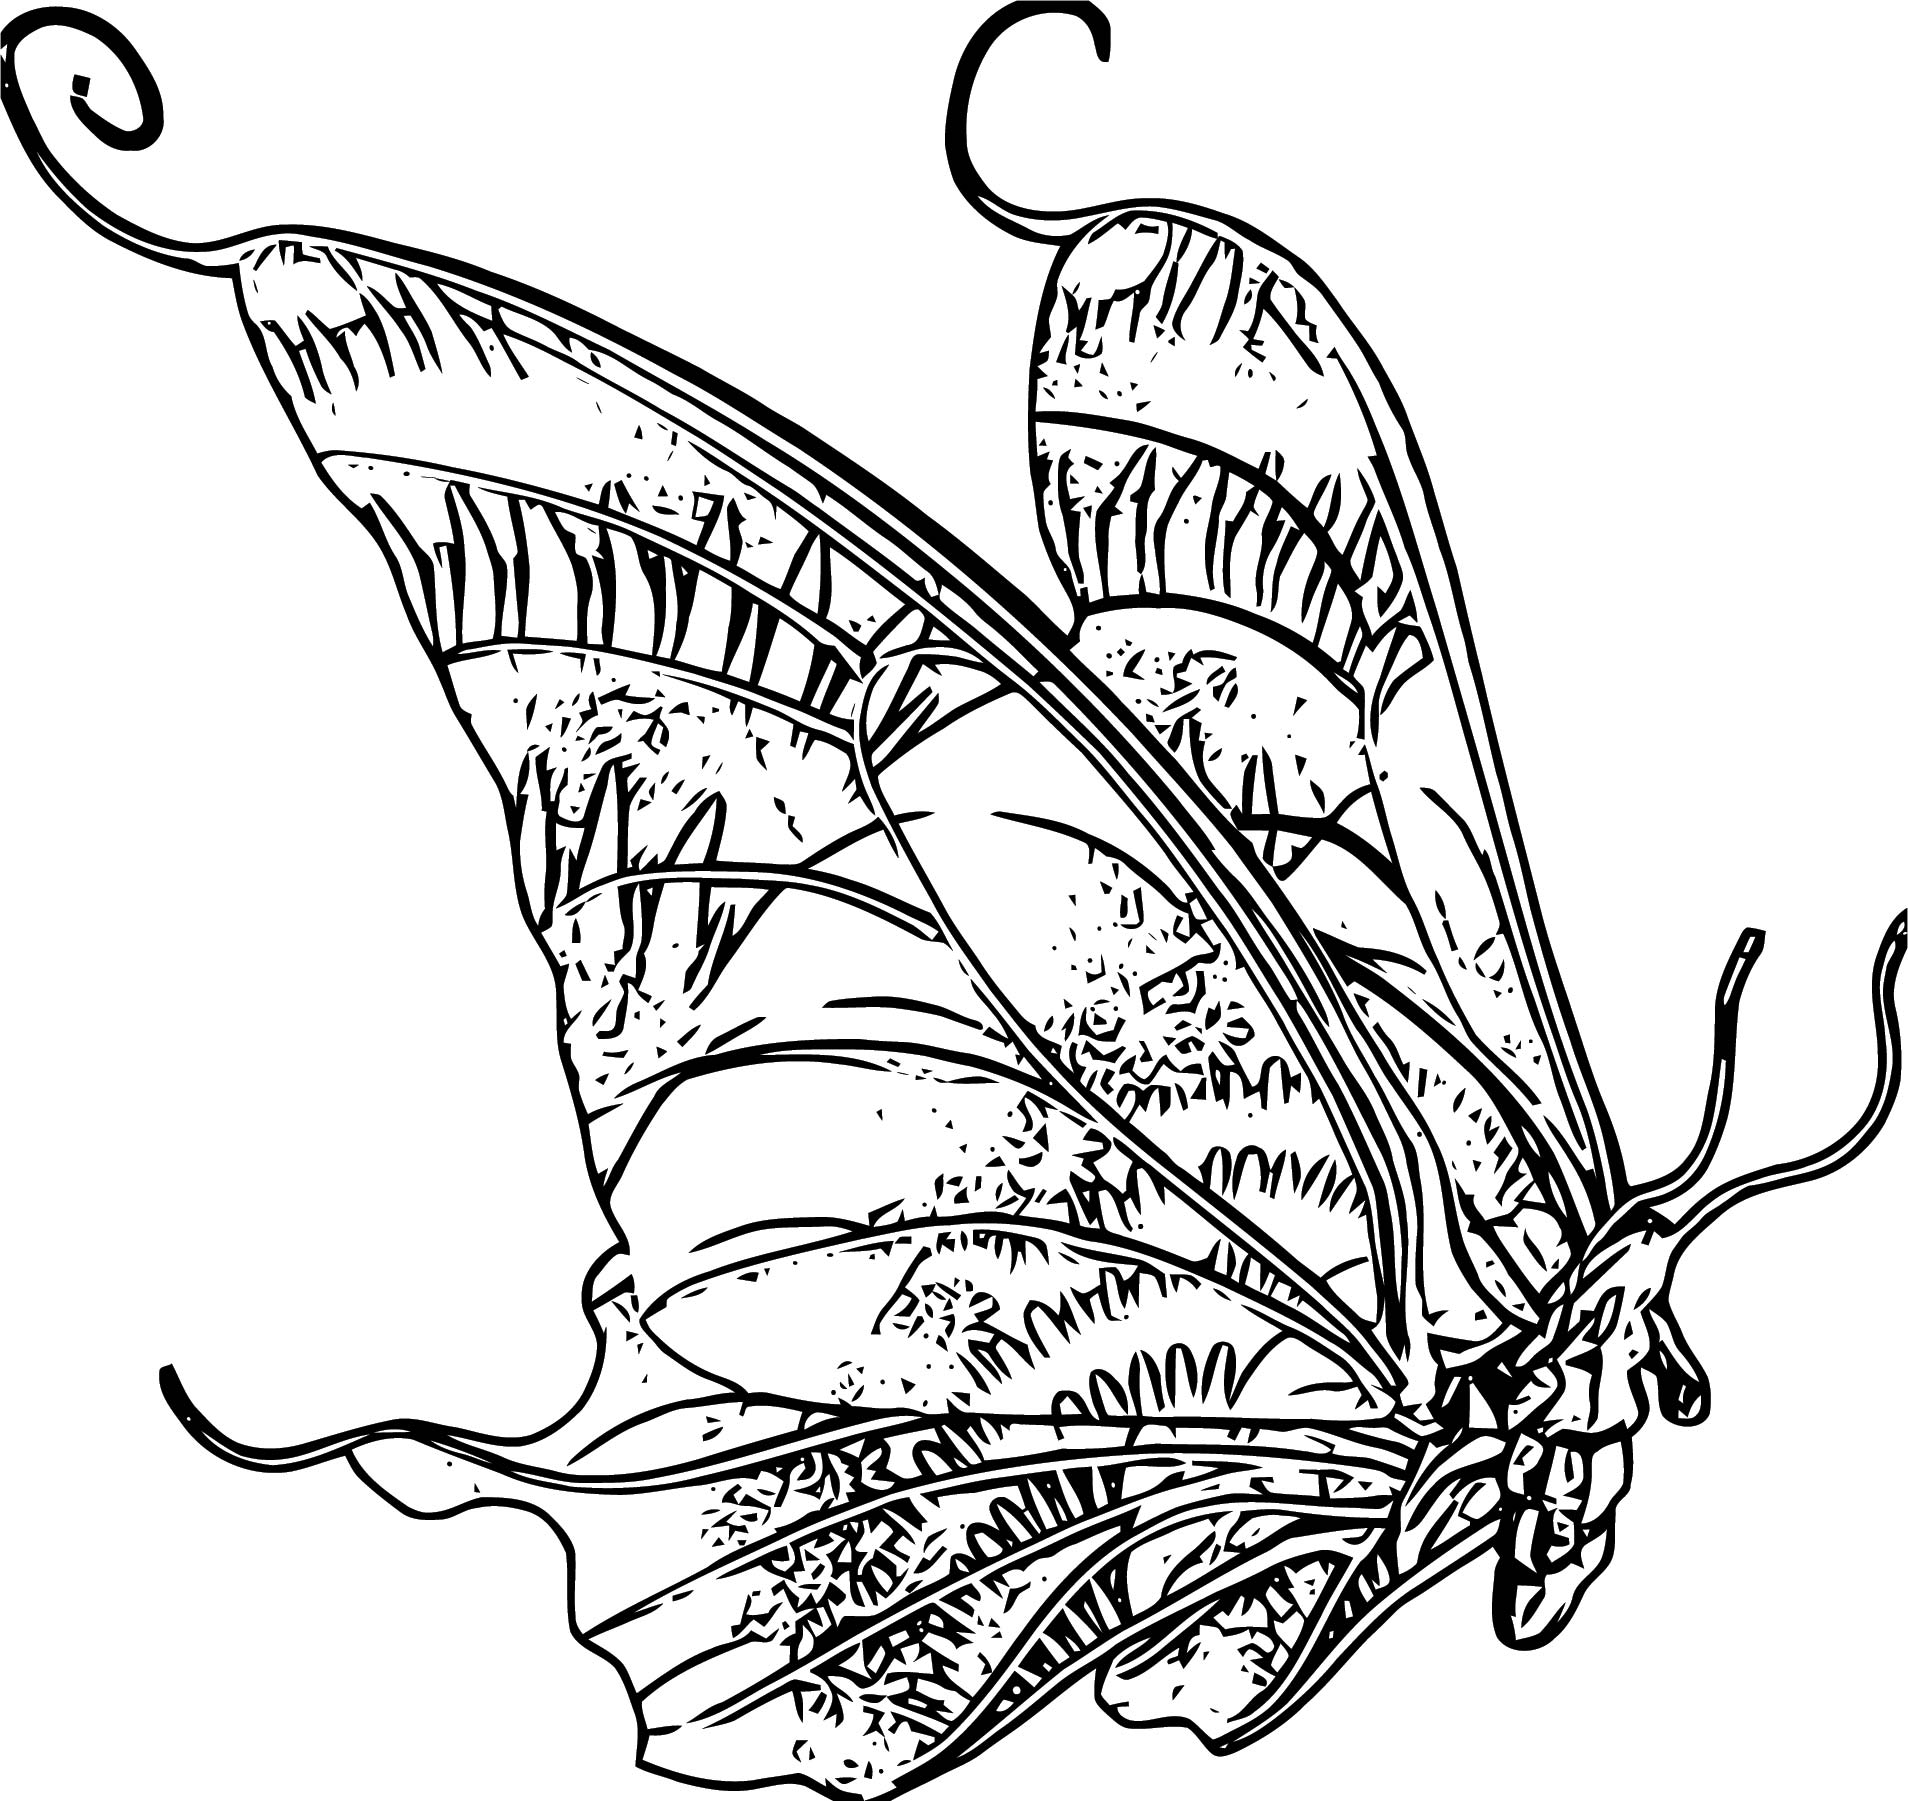 Butterfly Coloring Page Wecoloringpage (191) - Wecoloringpage.com